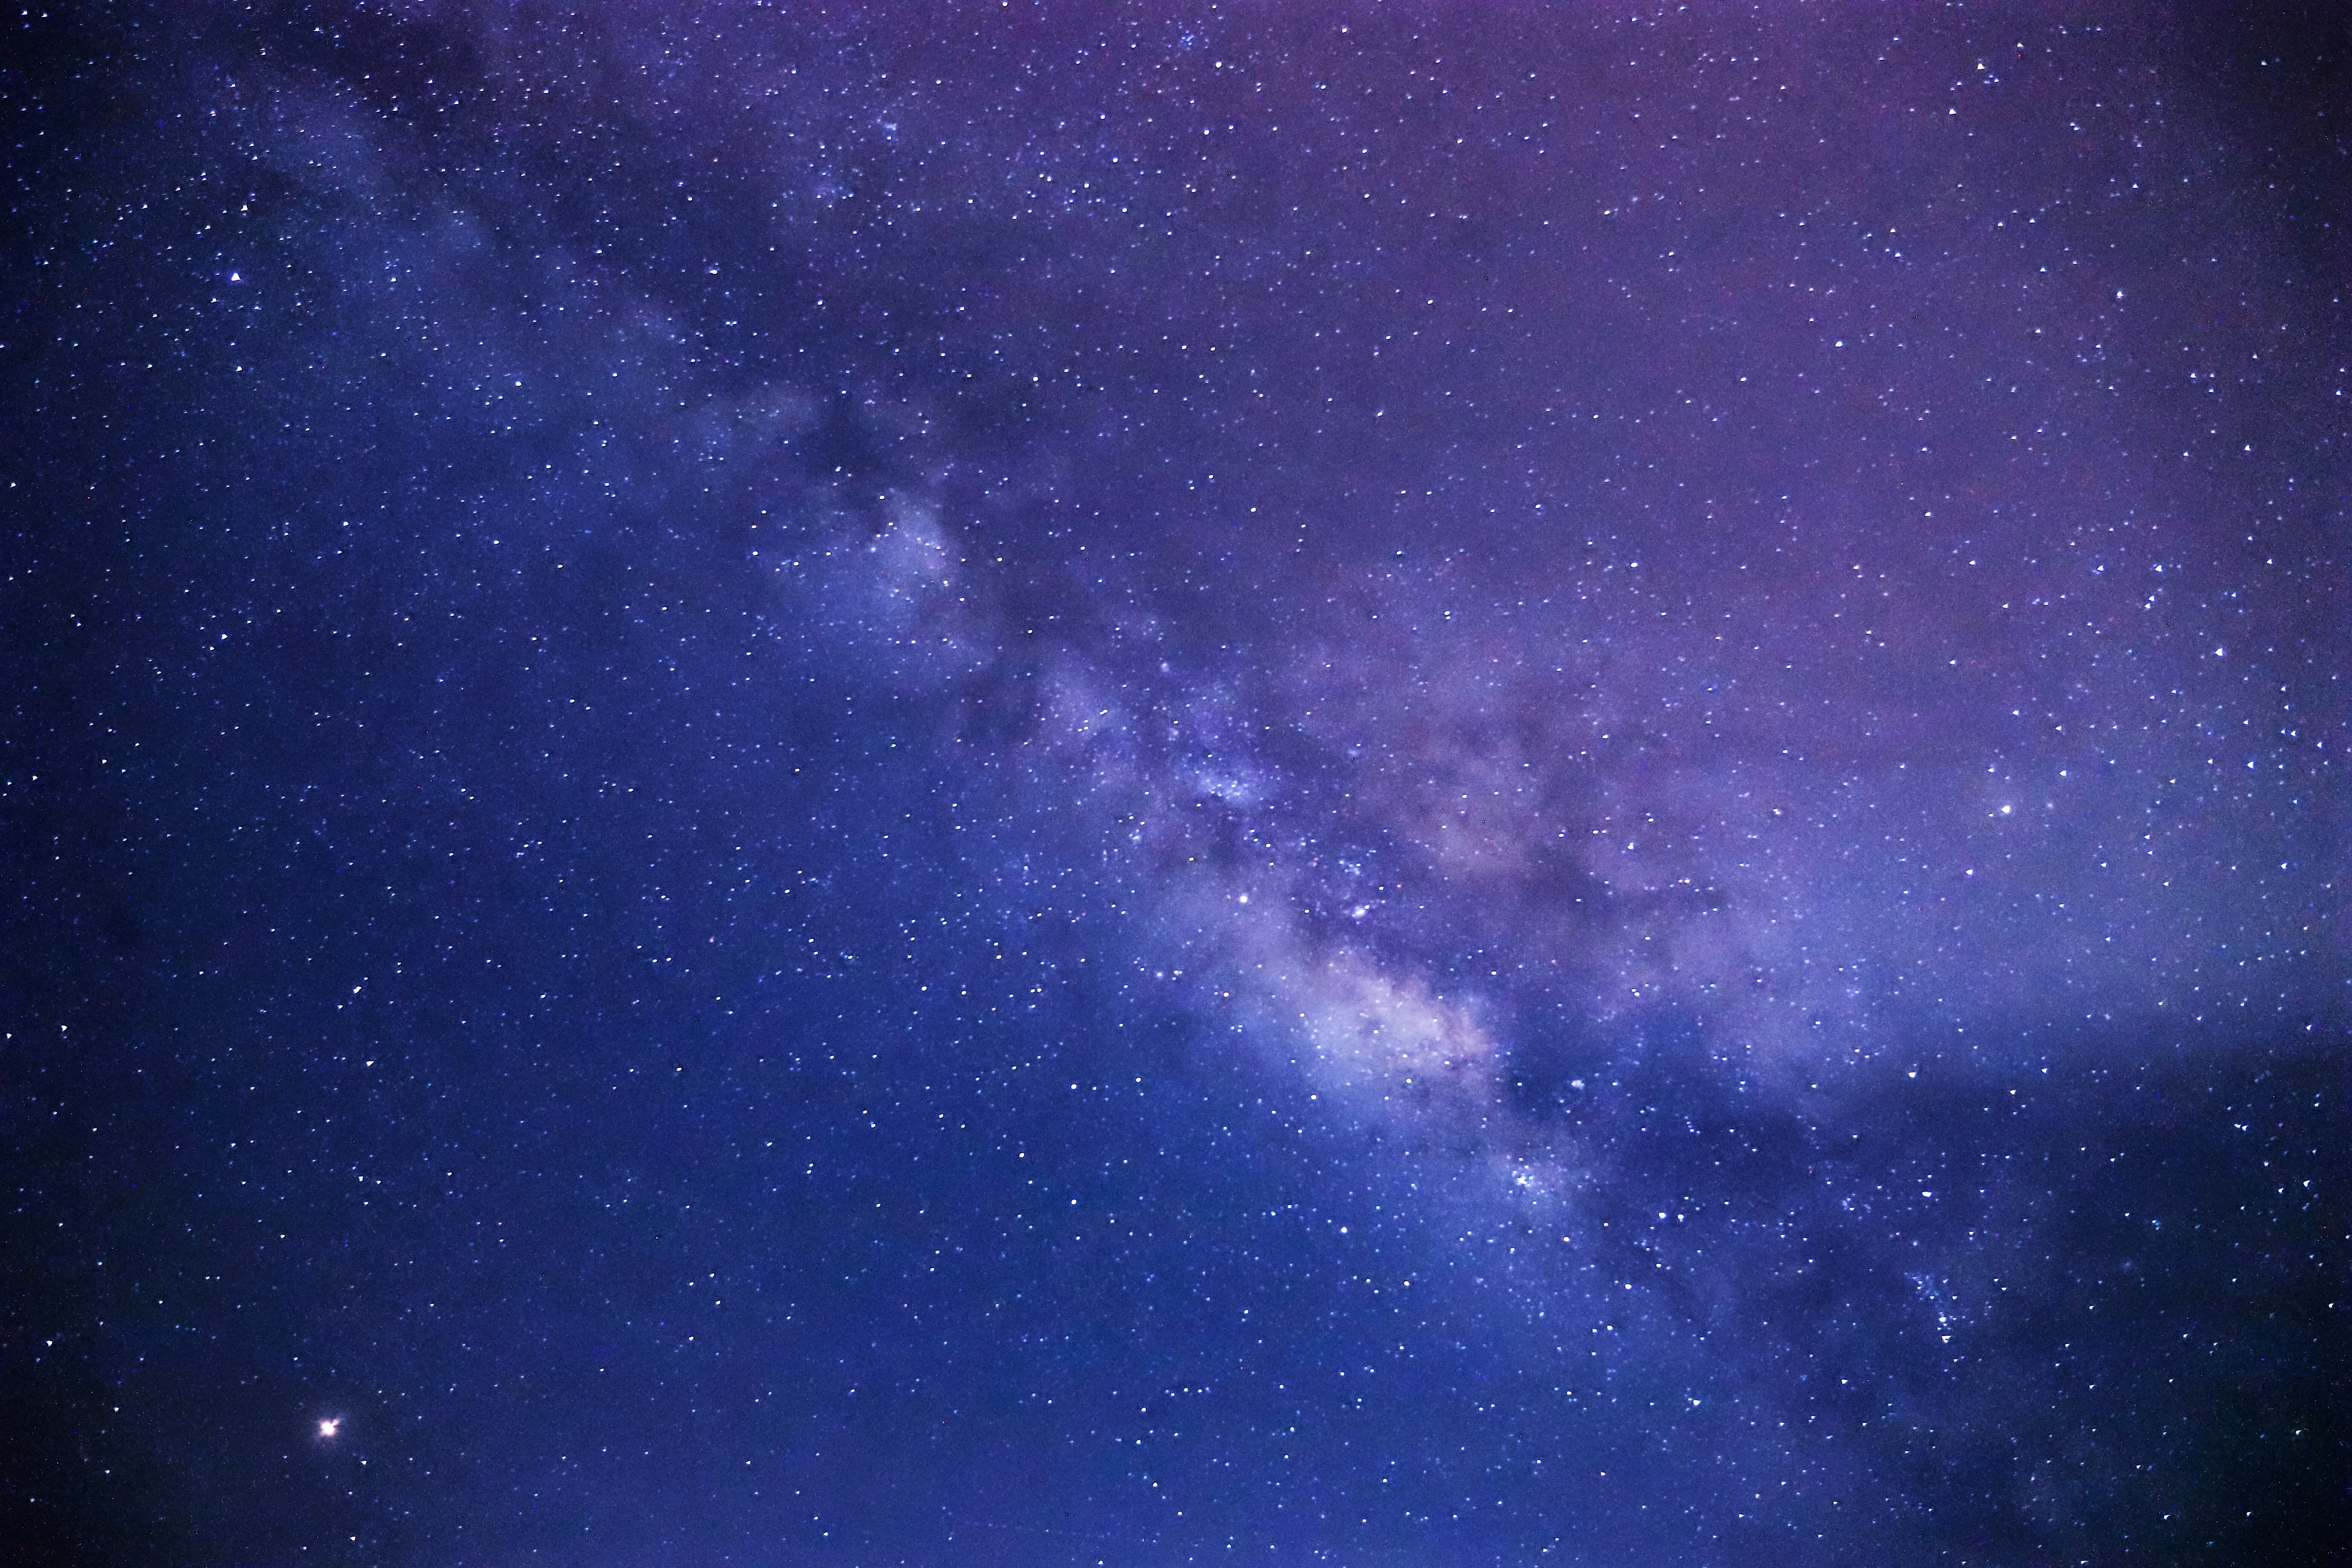 sky stars galaxy background backgrounds image by @freetoedit.